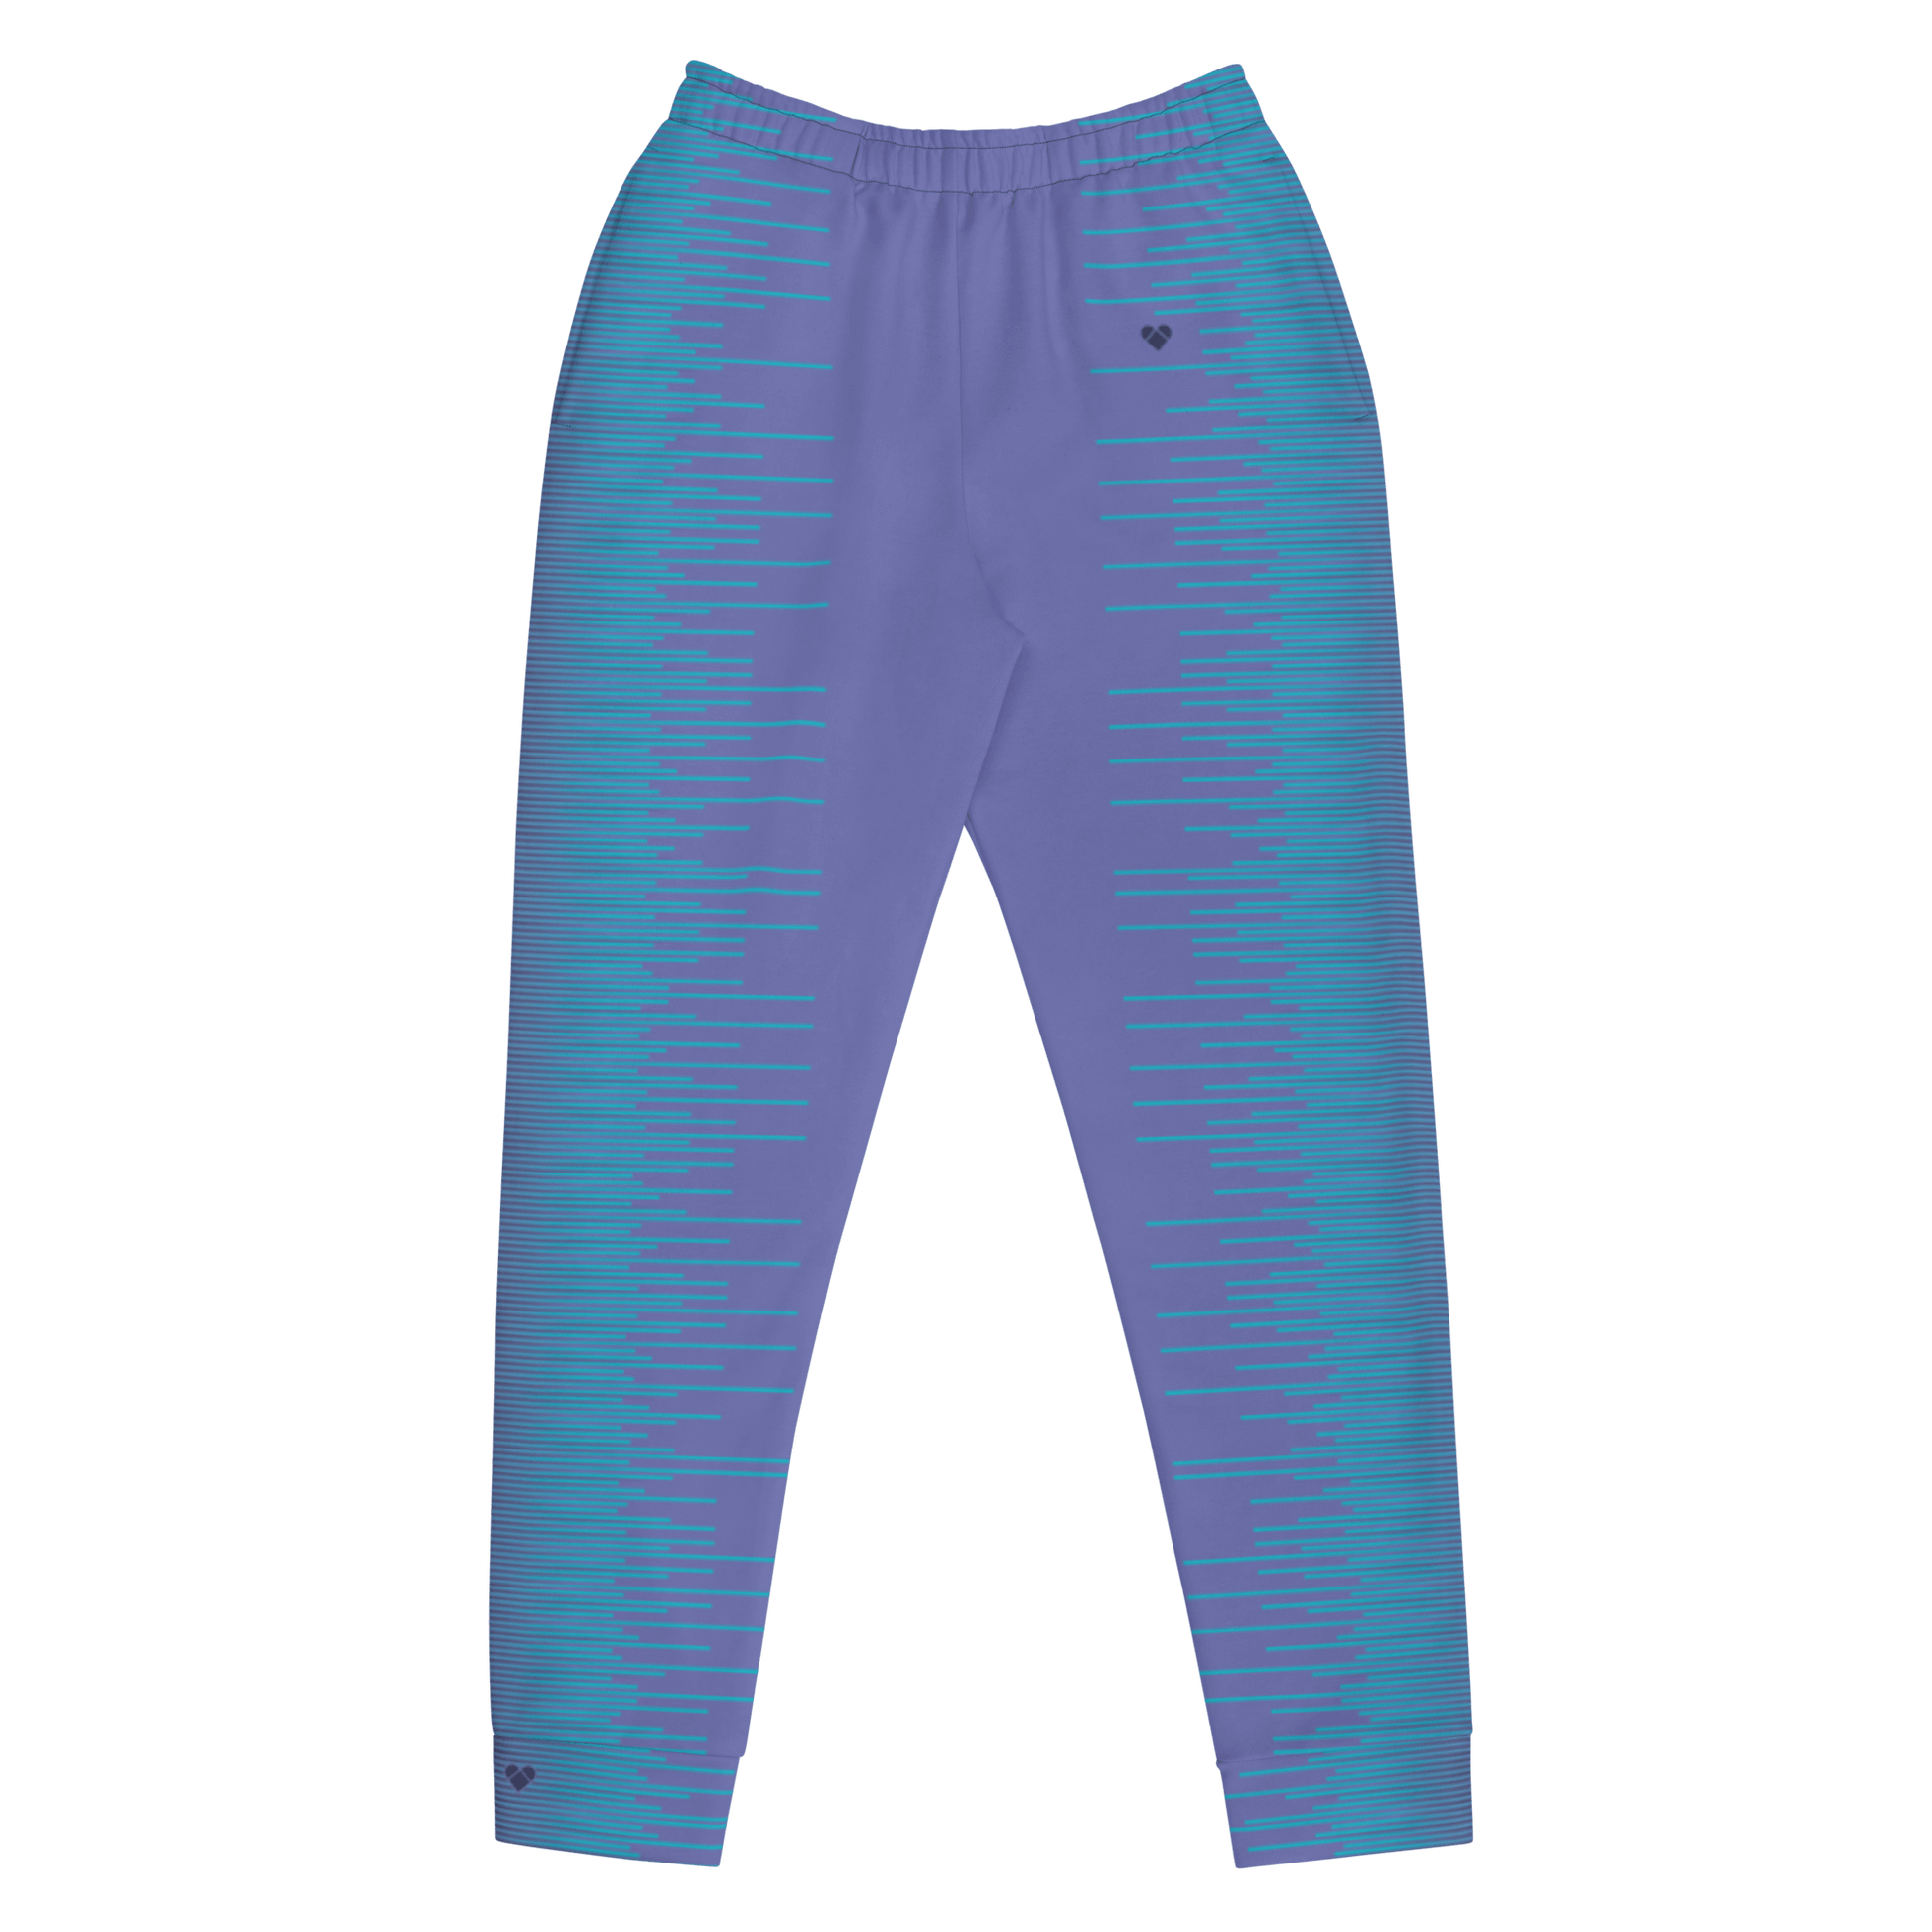 Periwinkle Dual Joggers for Women - A Stylish Choice from CRiZ AMOR's Amor Dual Collection